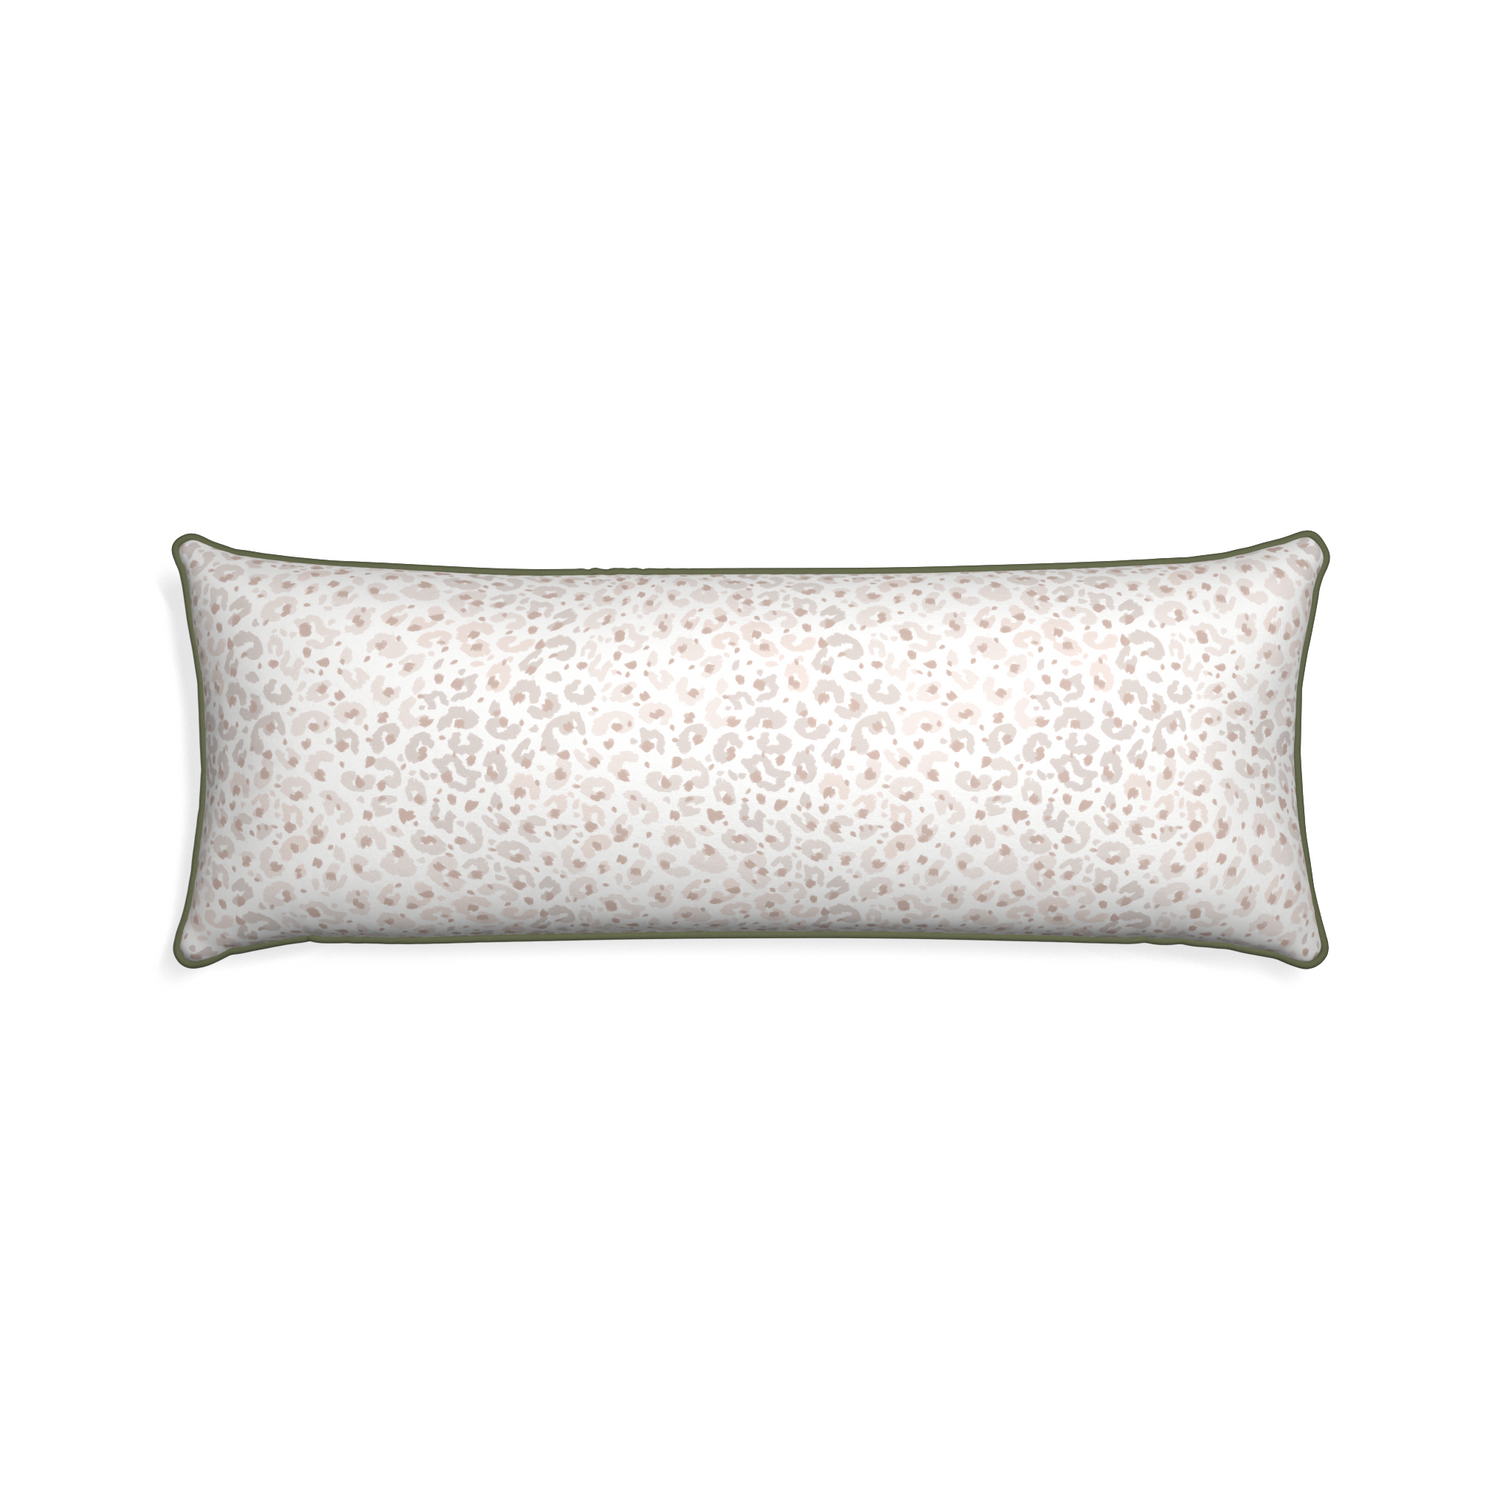 Xl-lumbar rosie custom pillow with f piping on white background